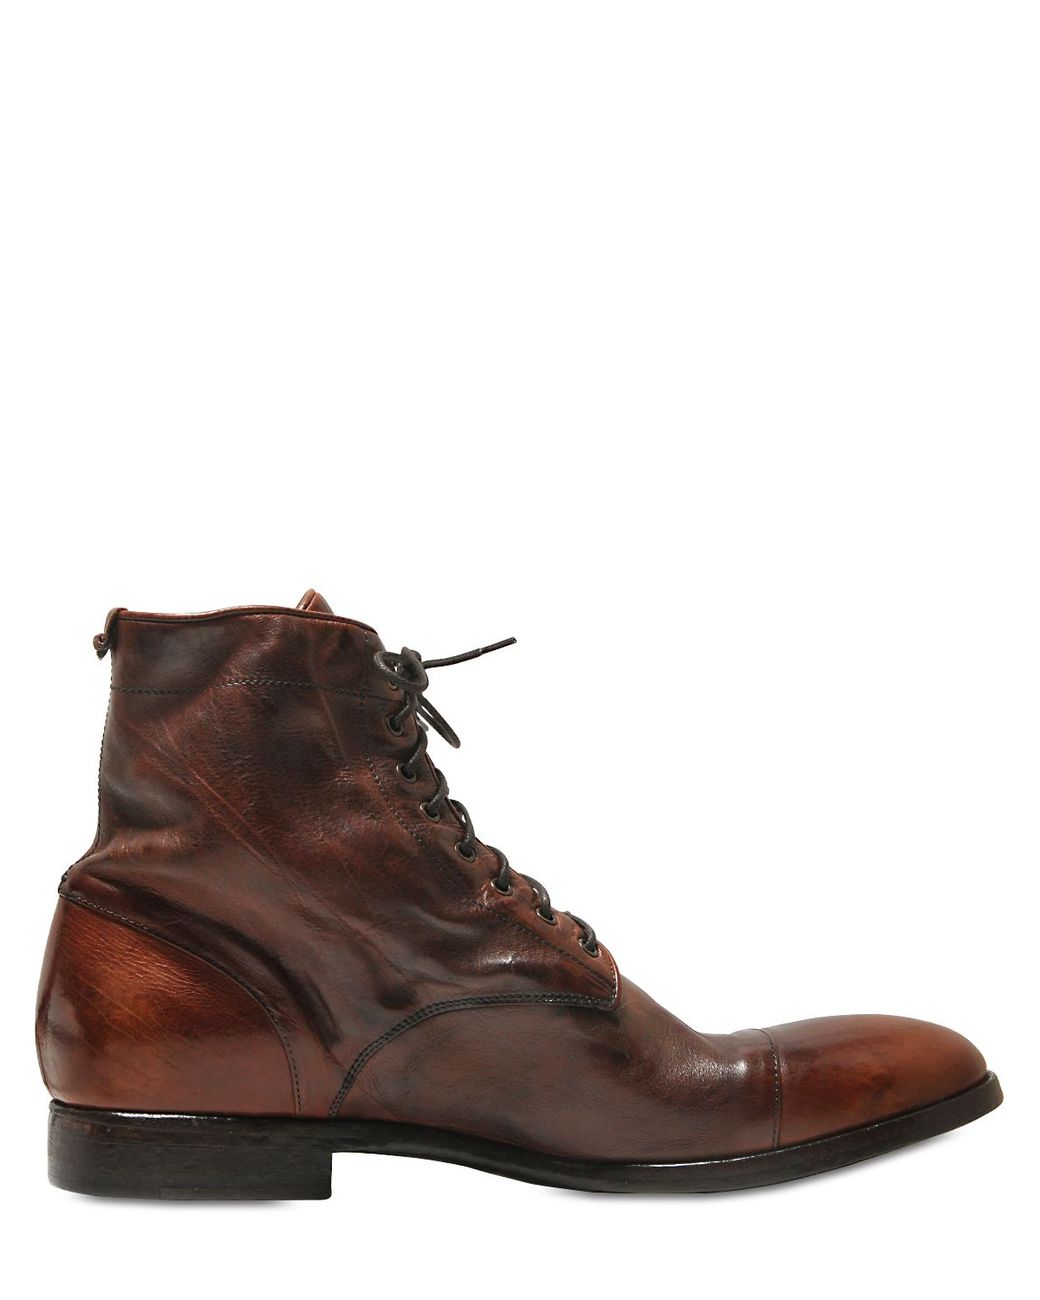 Rolando Sturlini Washed Leather Lace-up Boots in Brown for Men | Lyst